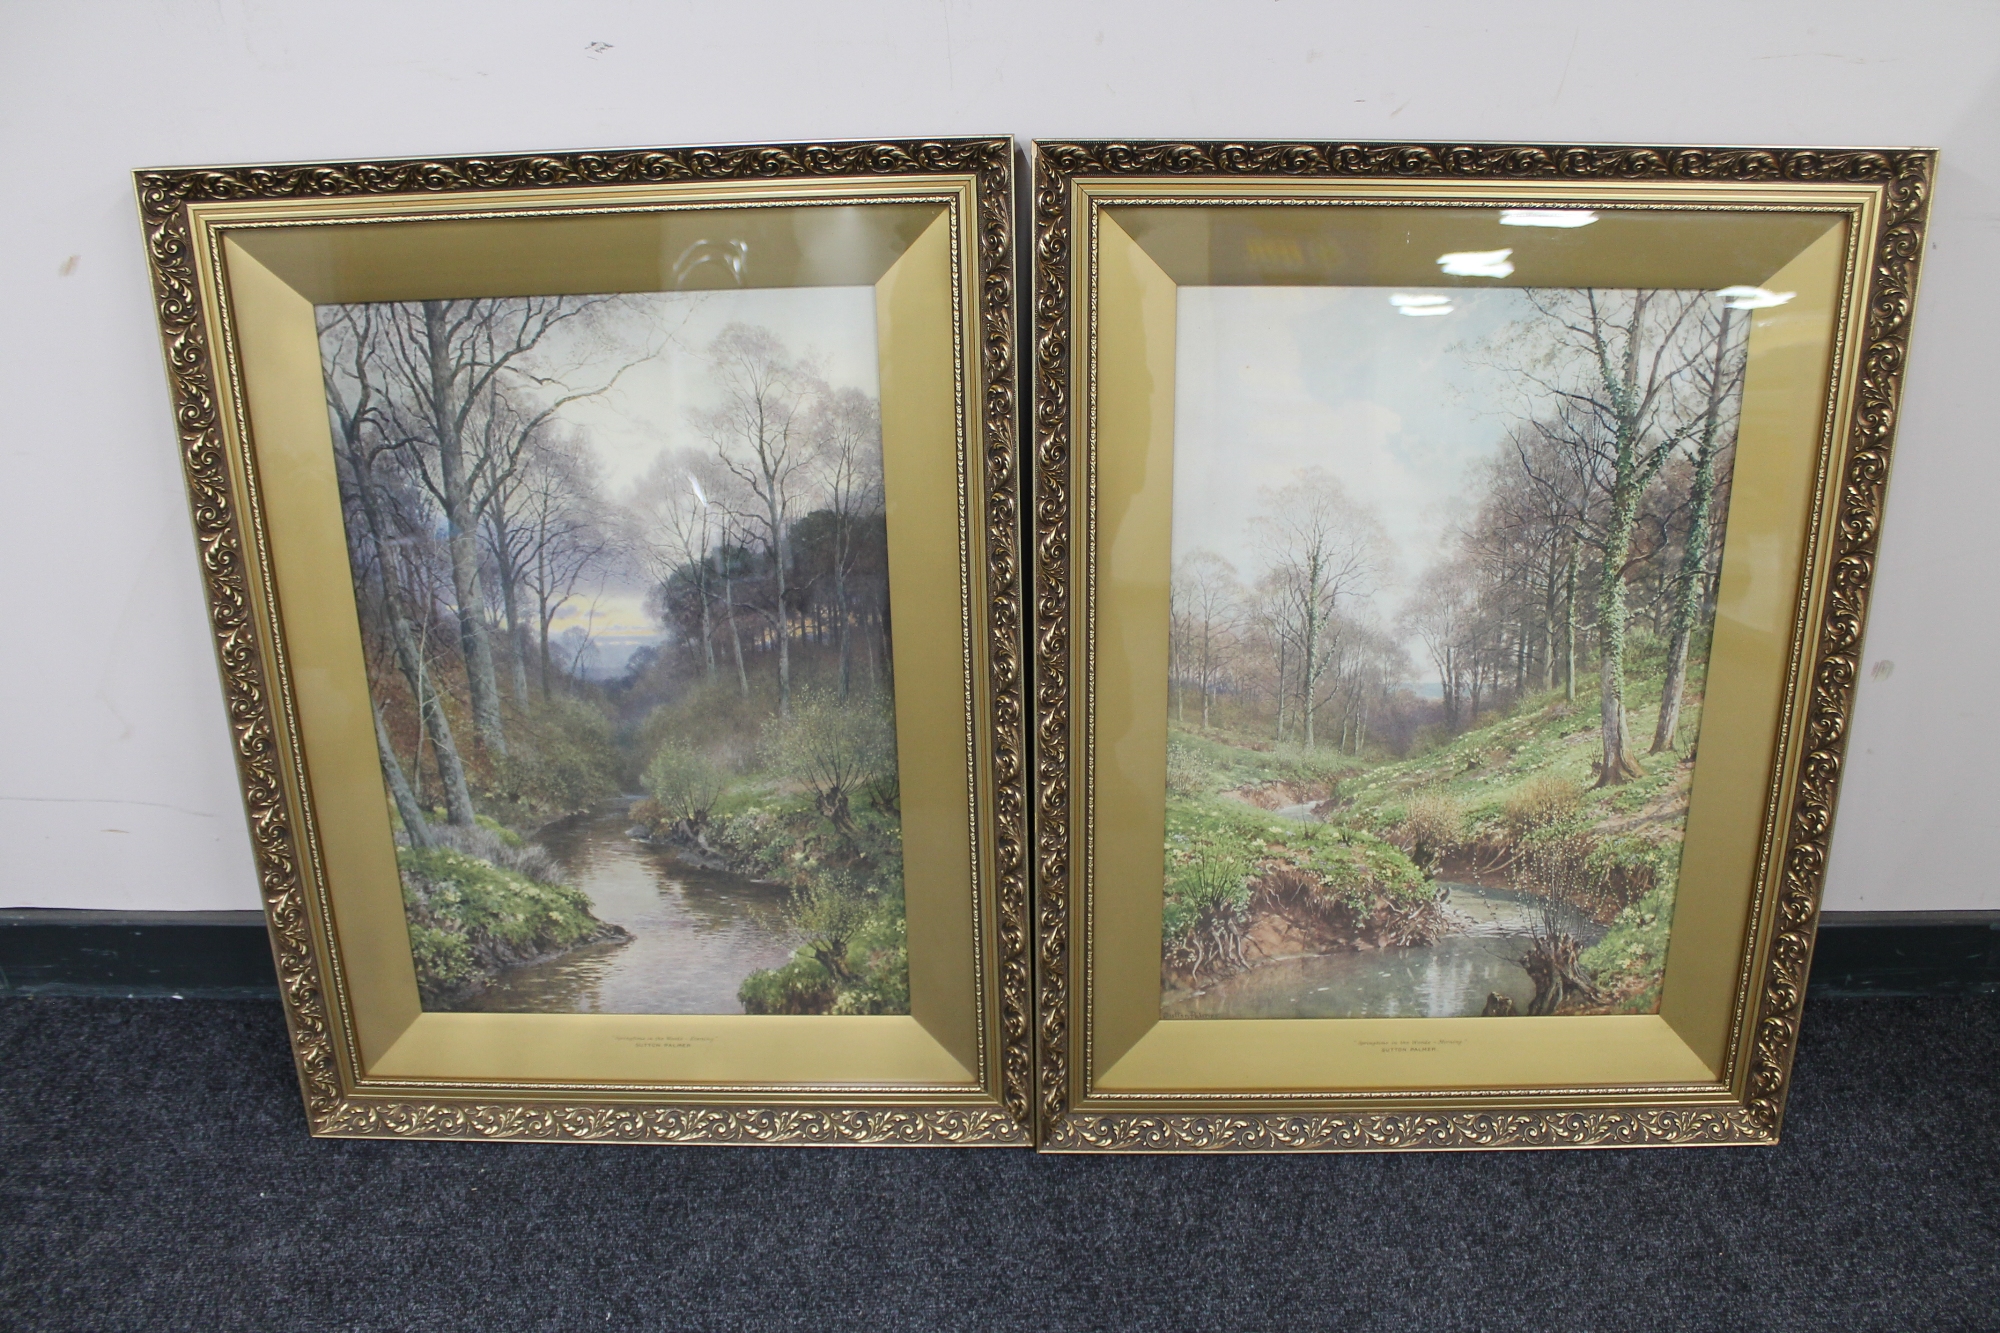 A pair of gilt framed Sutton Palmer prints - "Springtime in the woods" and "Evening and morning"